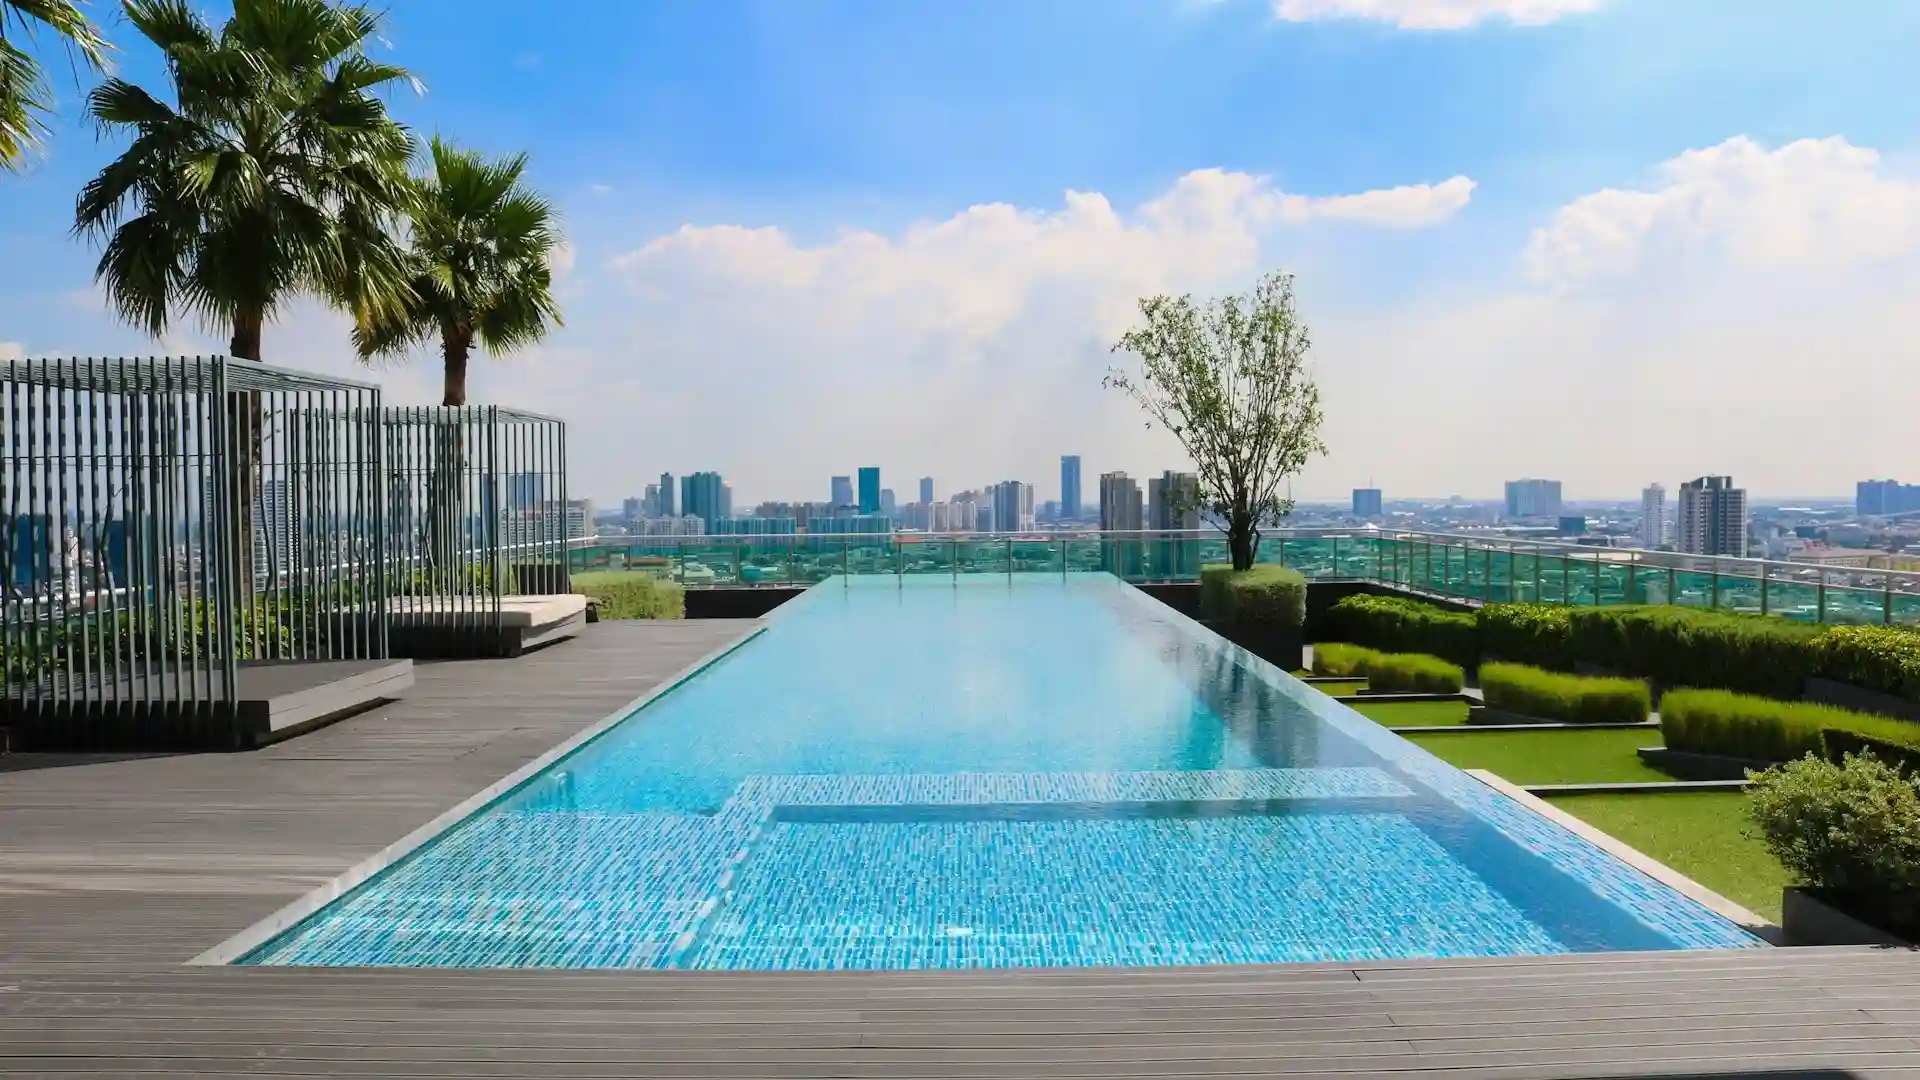 Rooftop infinity swimming pool at L&T Island Cove with panoramic city views, flanked by palm trees and modern lounge areas, epitomizing upscale urban living.